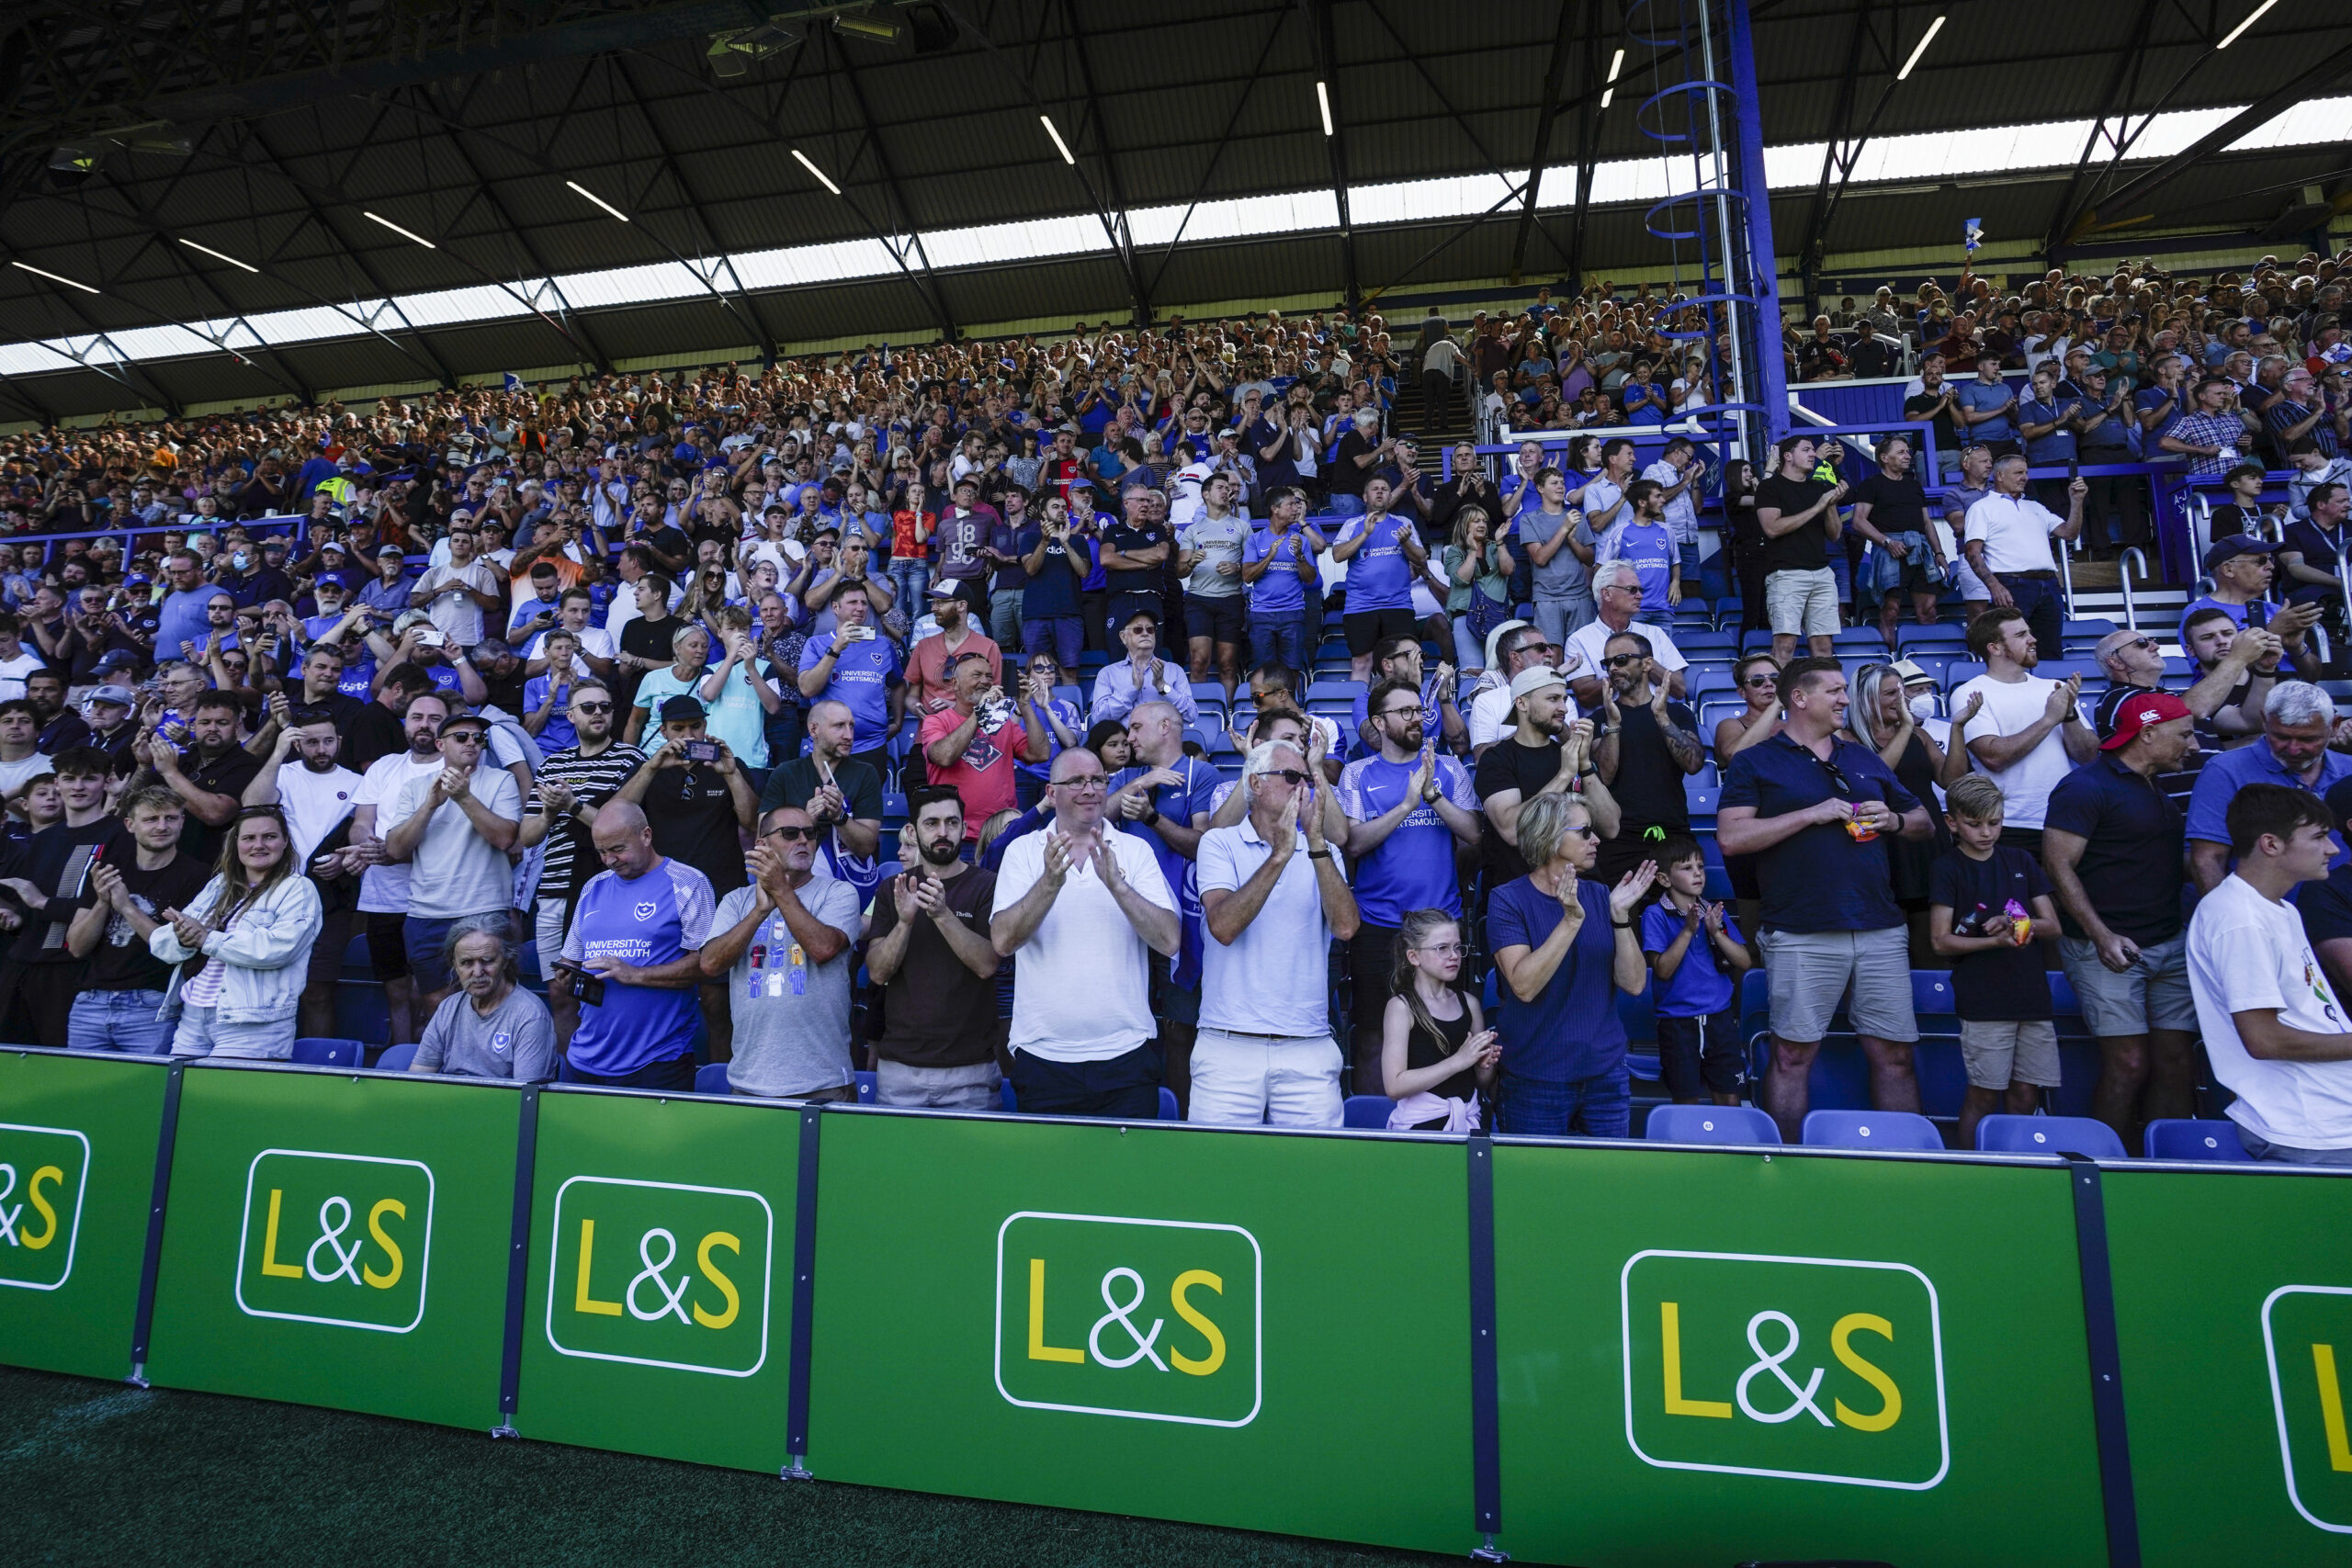 L&S Waste Management celebrate a decade of support with renewed Portsmouth Football Club deal L&S Waste Management